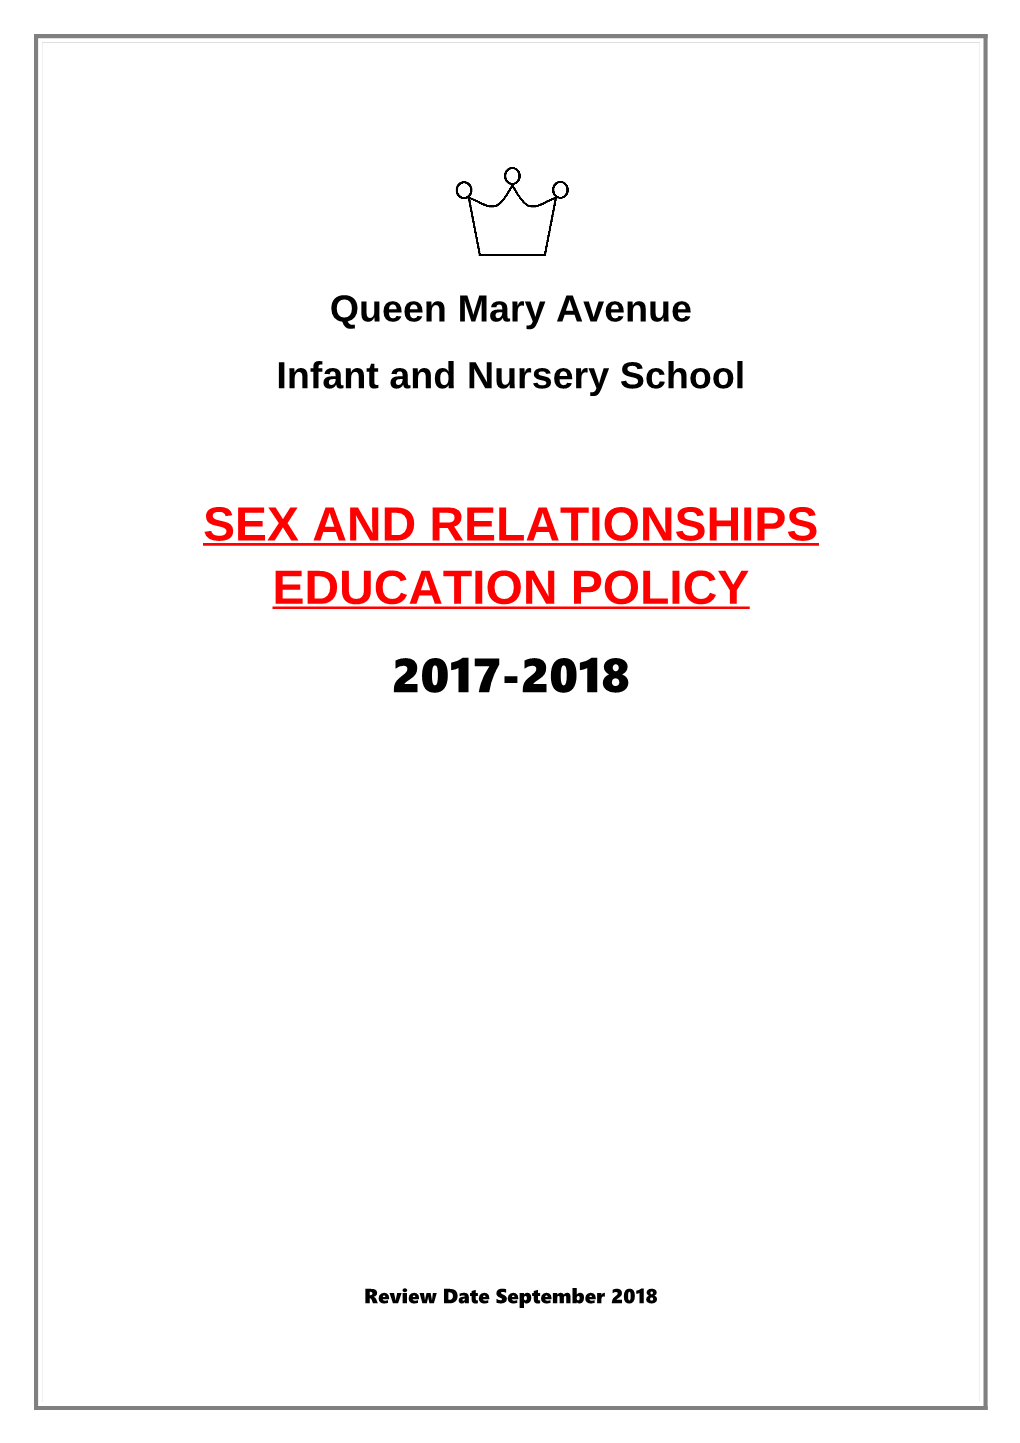 Queen Mary Avenue Infant and Nursery School